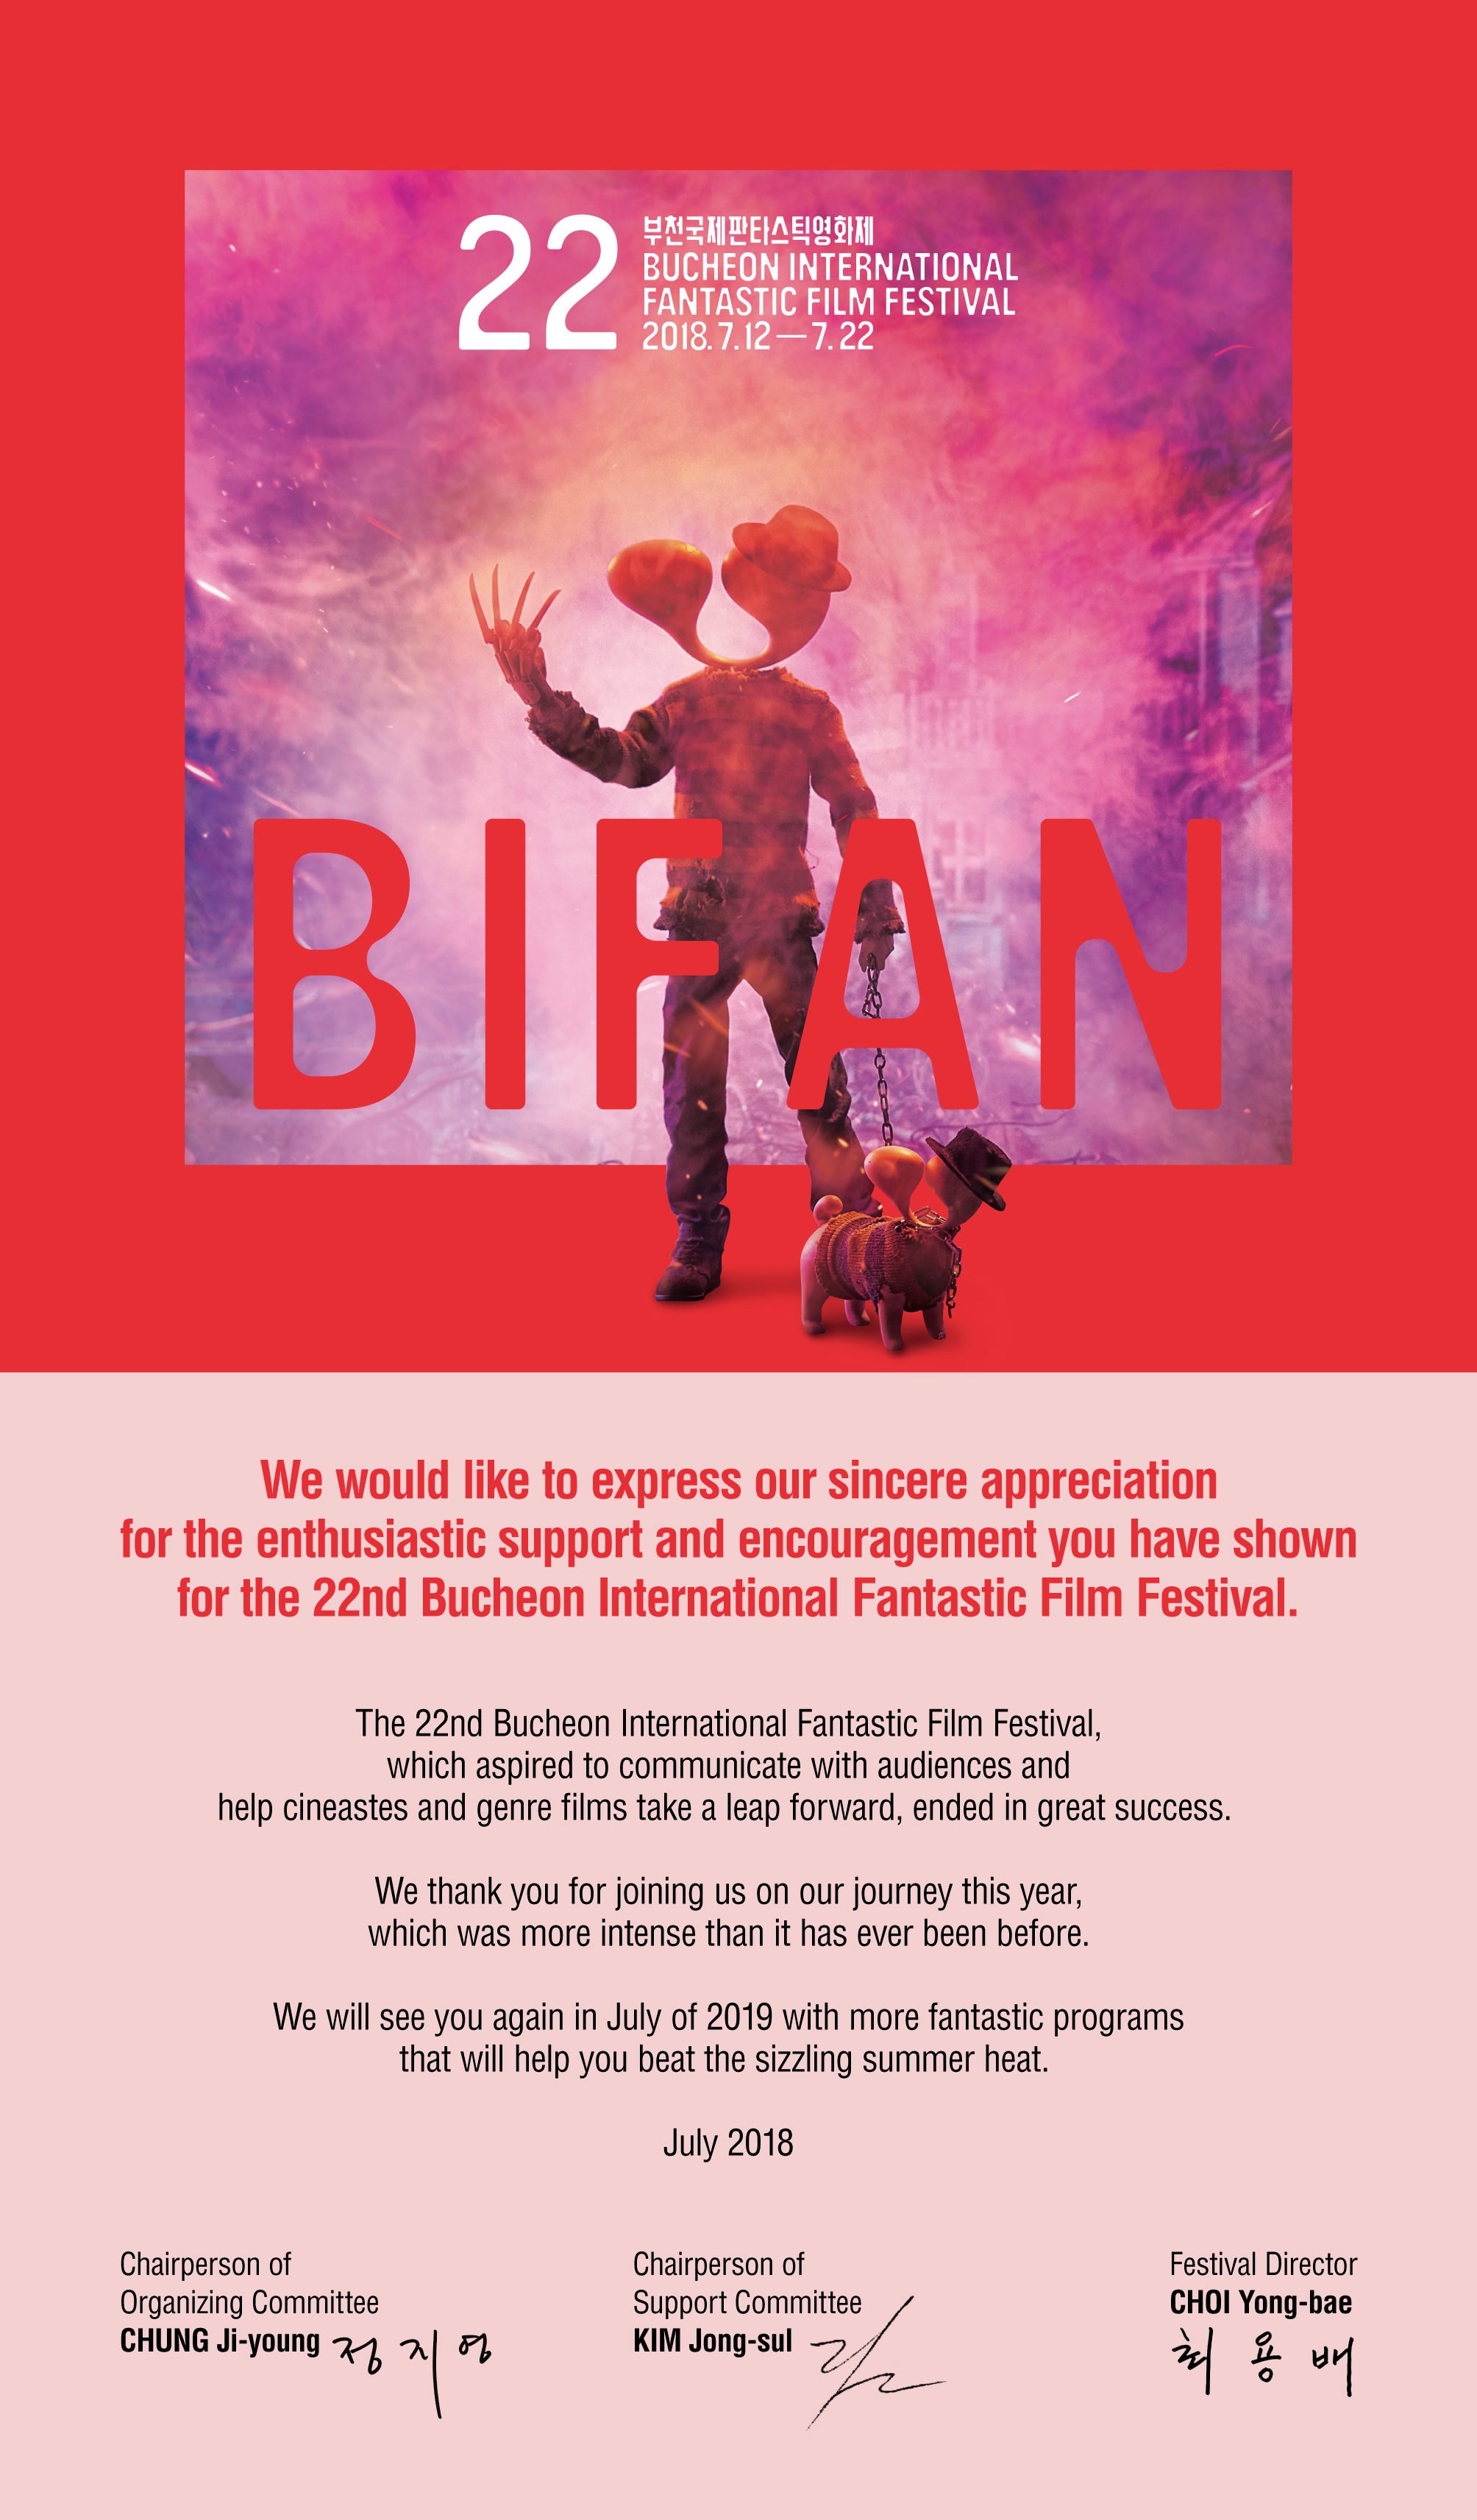 We would like to express our sincere appreciation for the enthusiastic support and encouragement you have shown for the 22nd BIFAN